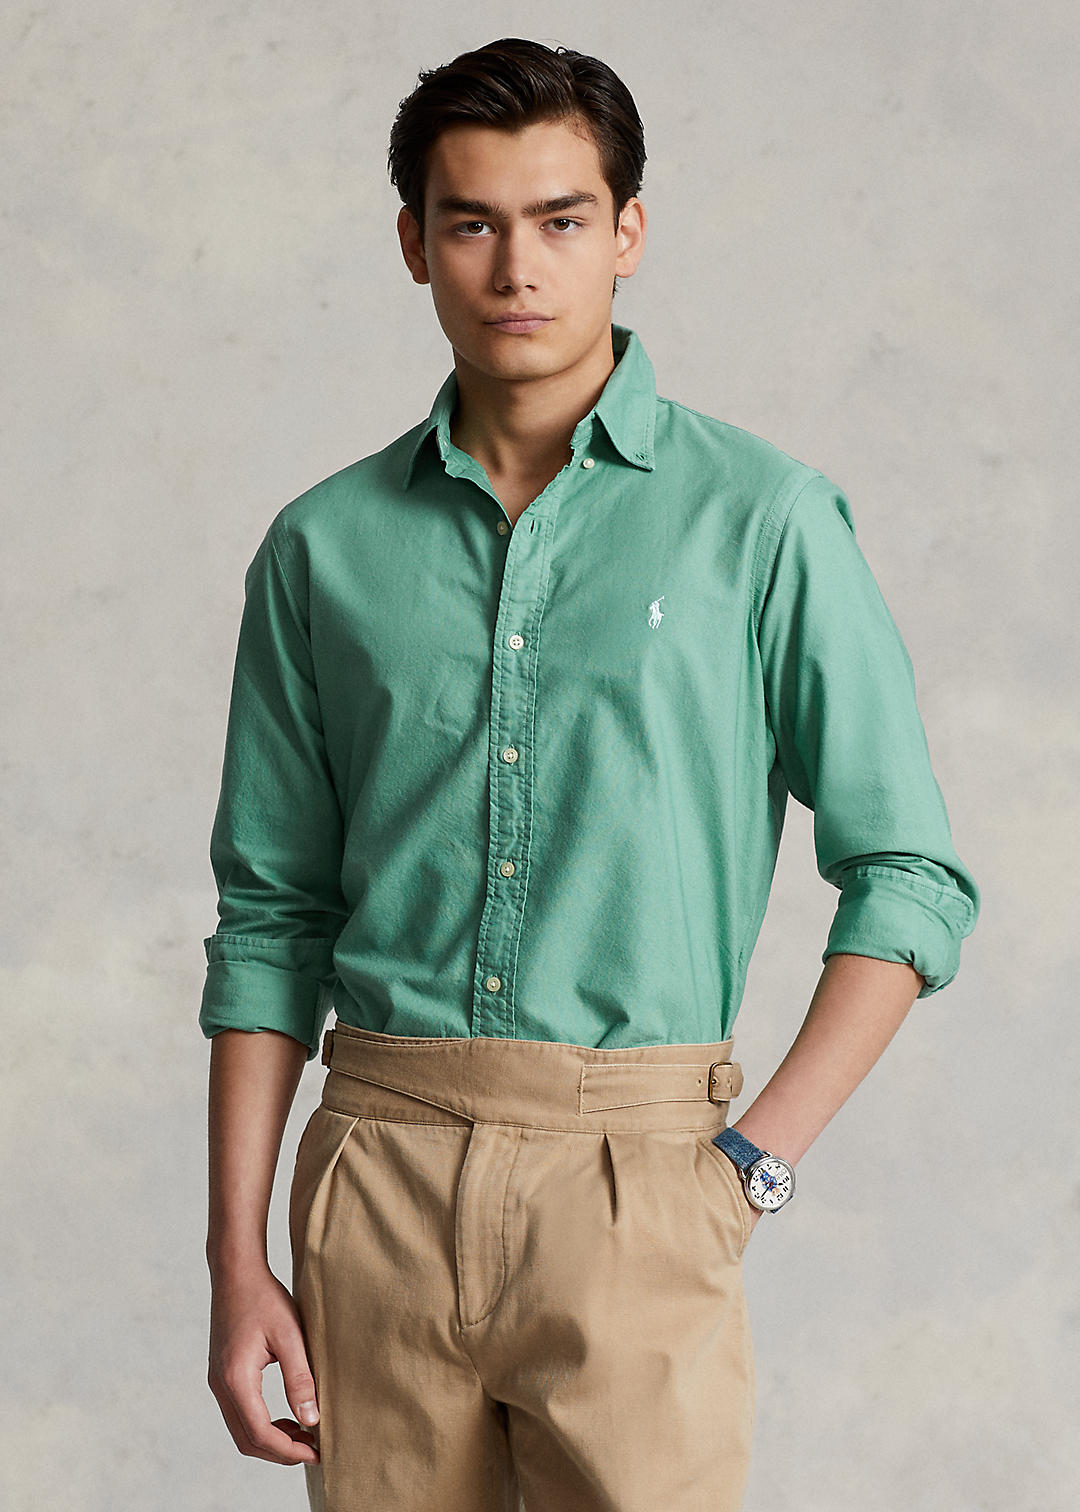 Classic Fit Garment-Dyed Oxford Shirt - All Fits